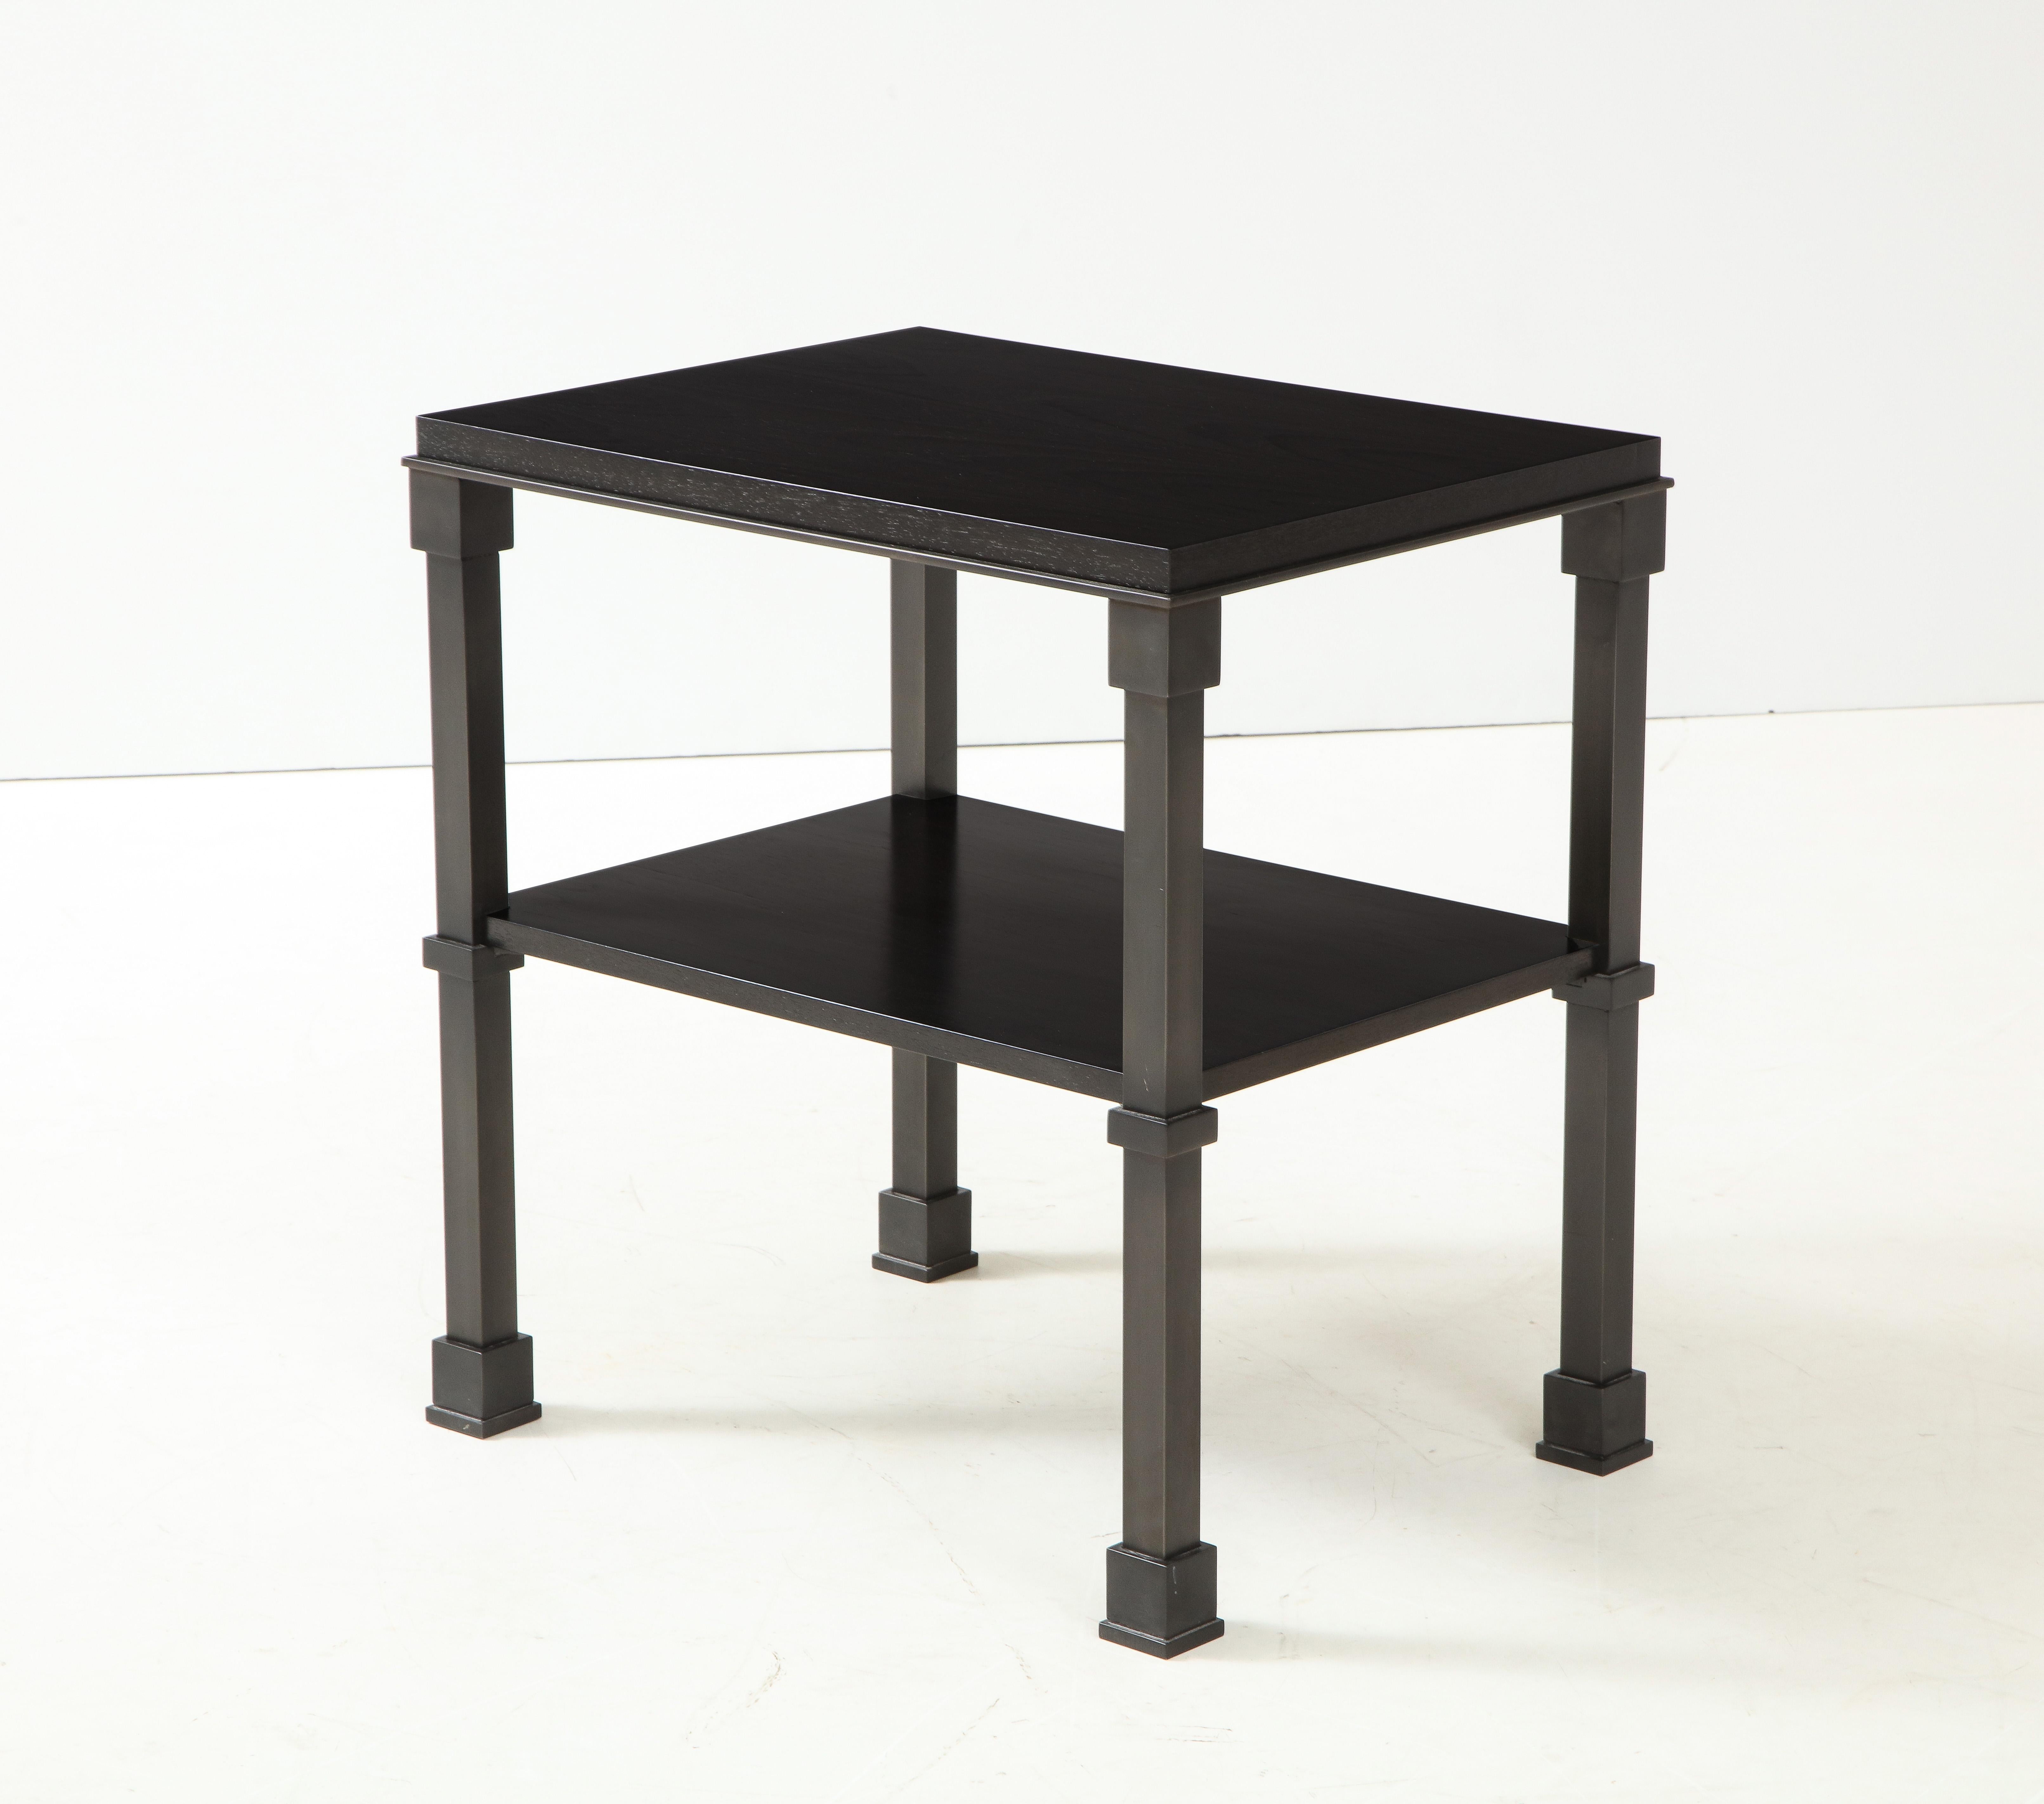 Made to order 'Quinet' console & end tables
Hand made metal base, Ebonized wood top
Measures: H: 32 D: 18 W: 60 inches this console & table in stock

Available in various materials, sizes & finishes.